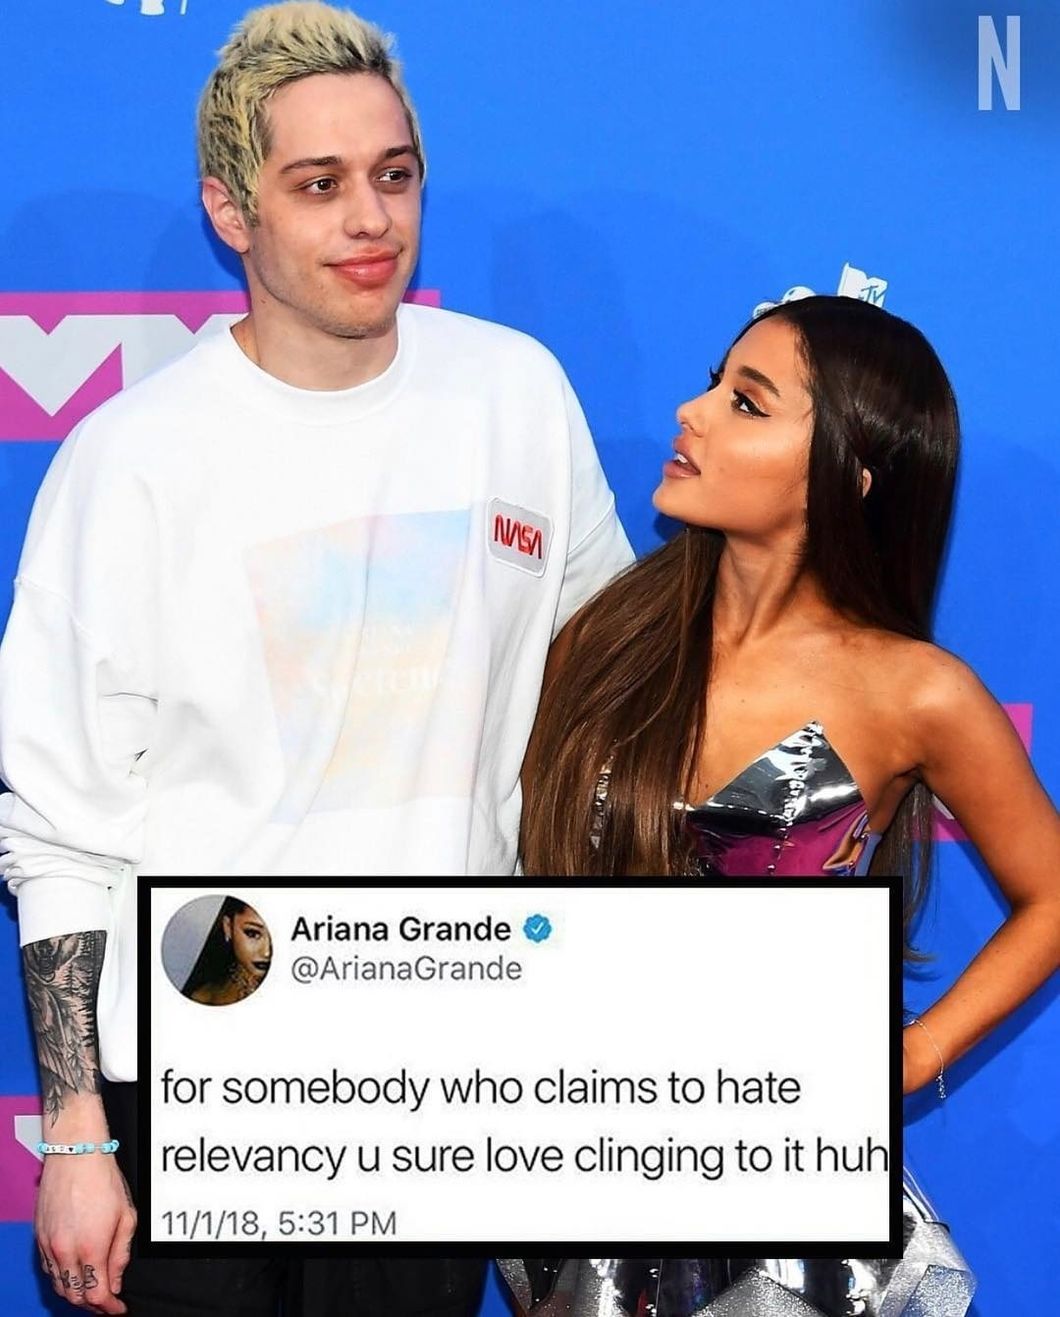 Did Ariana Grande And Pete Davidson Really Date, Or Was It A Marketing Ploy?